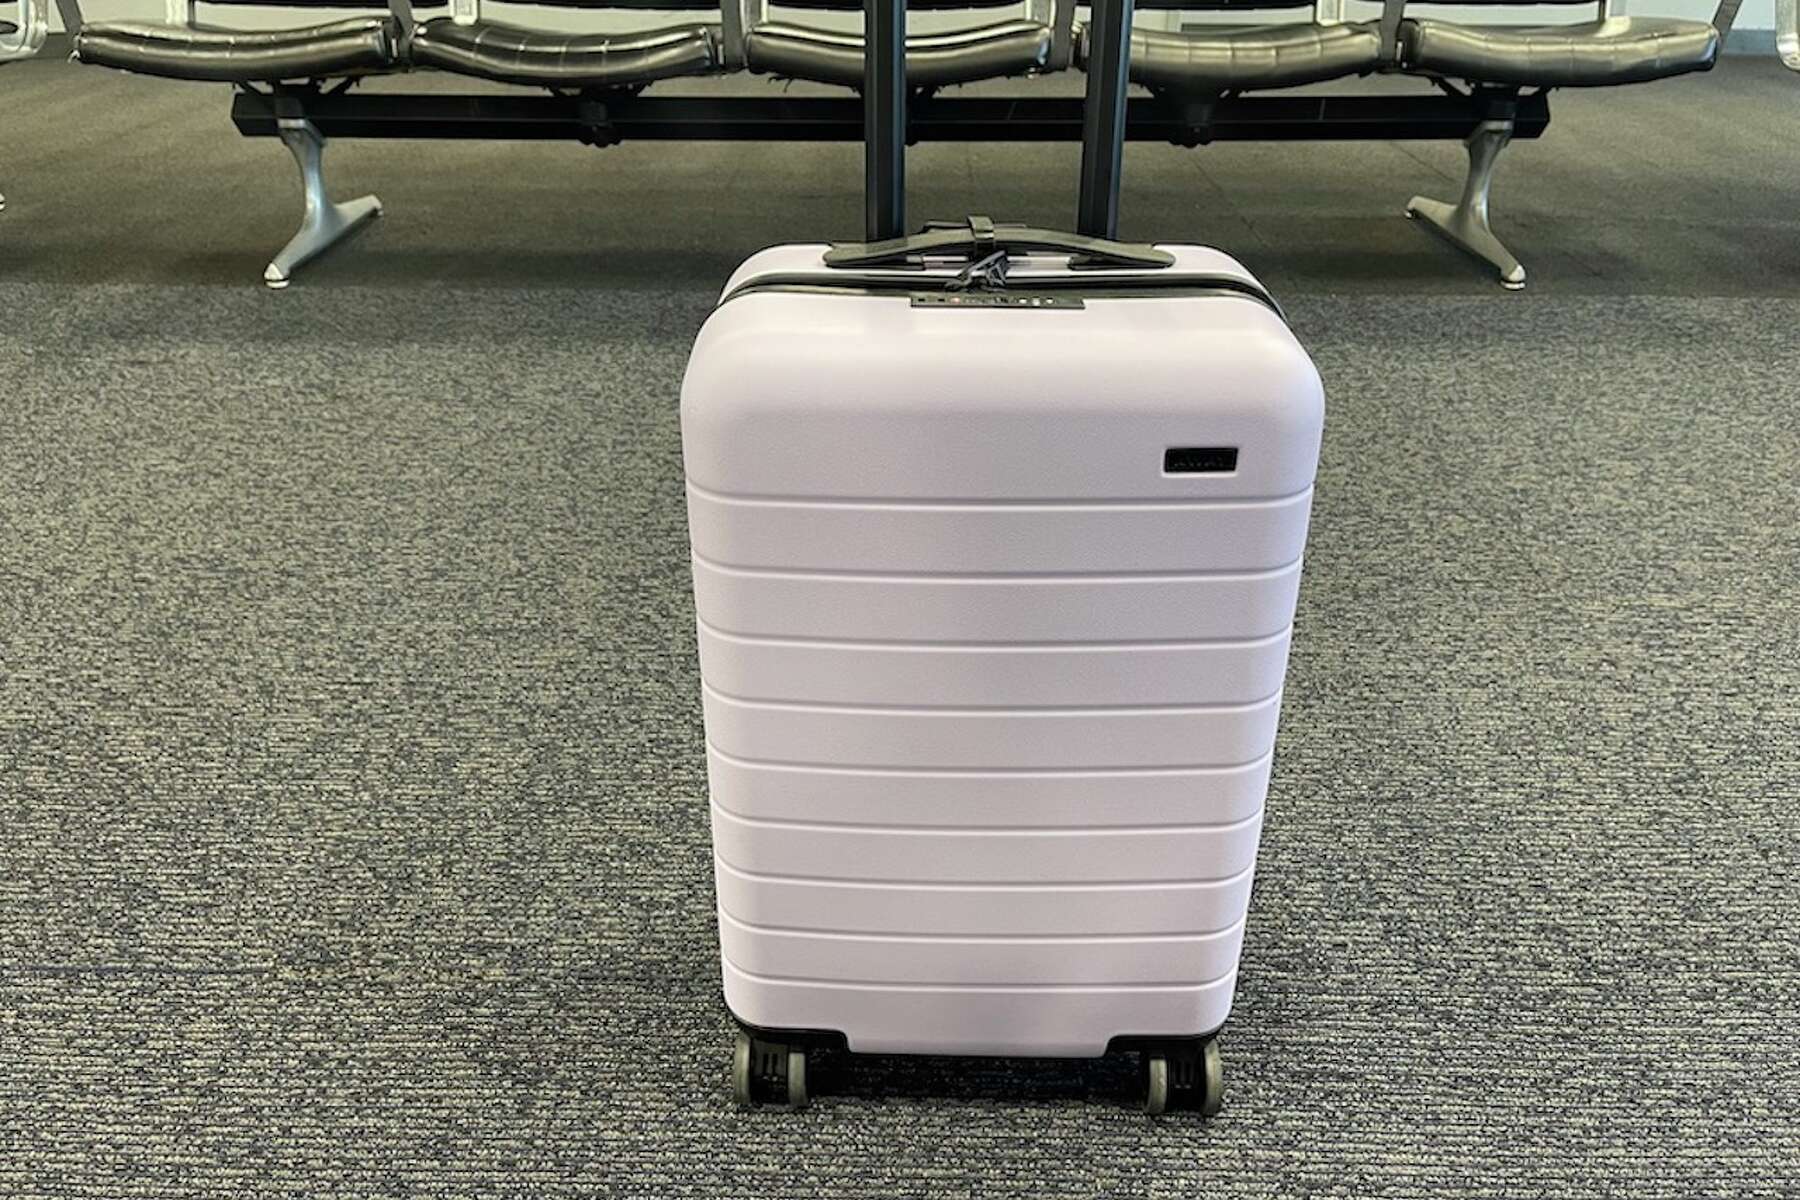 The Original Carry-On suitcase